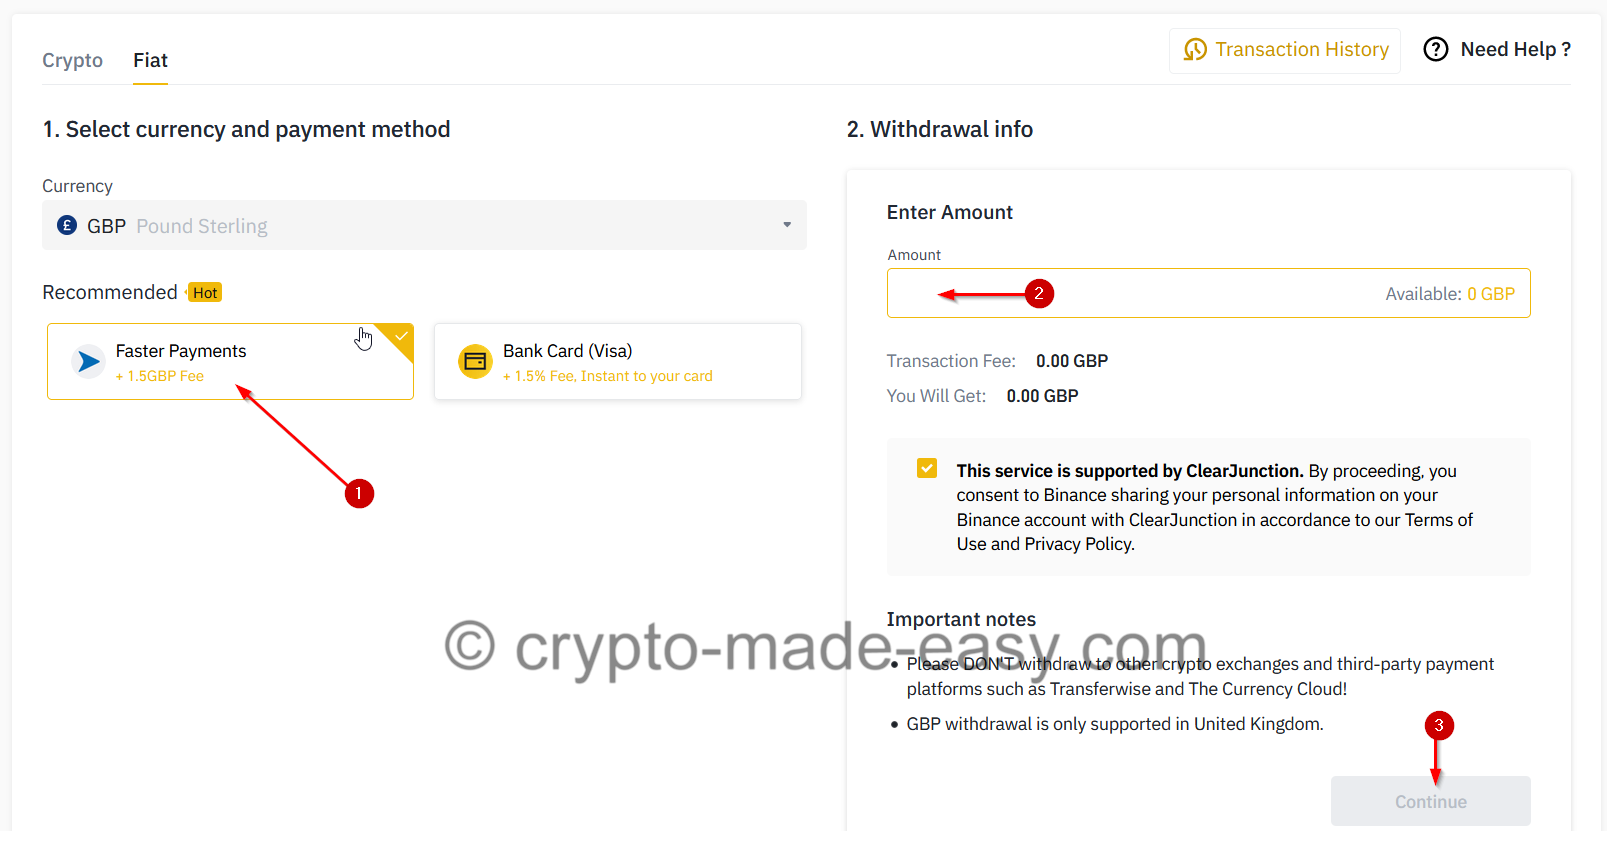 How to Withdraw Money from Binance - Complete Step-by-Step ...